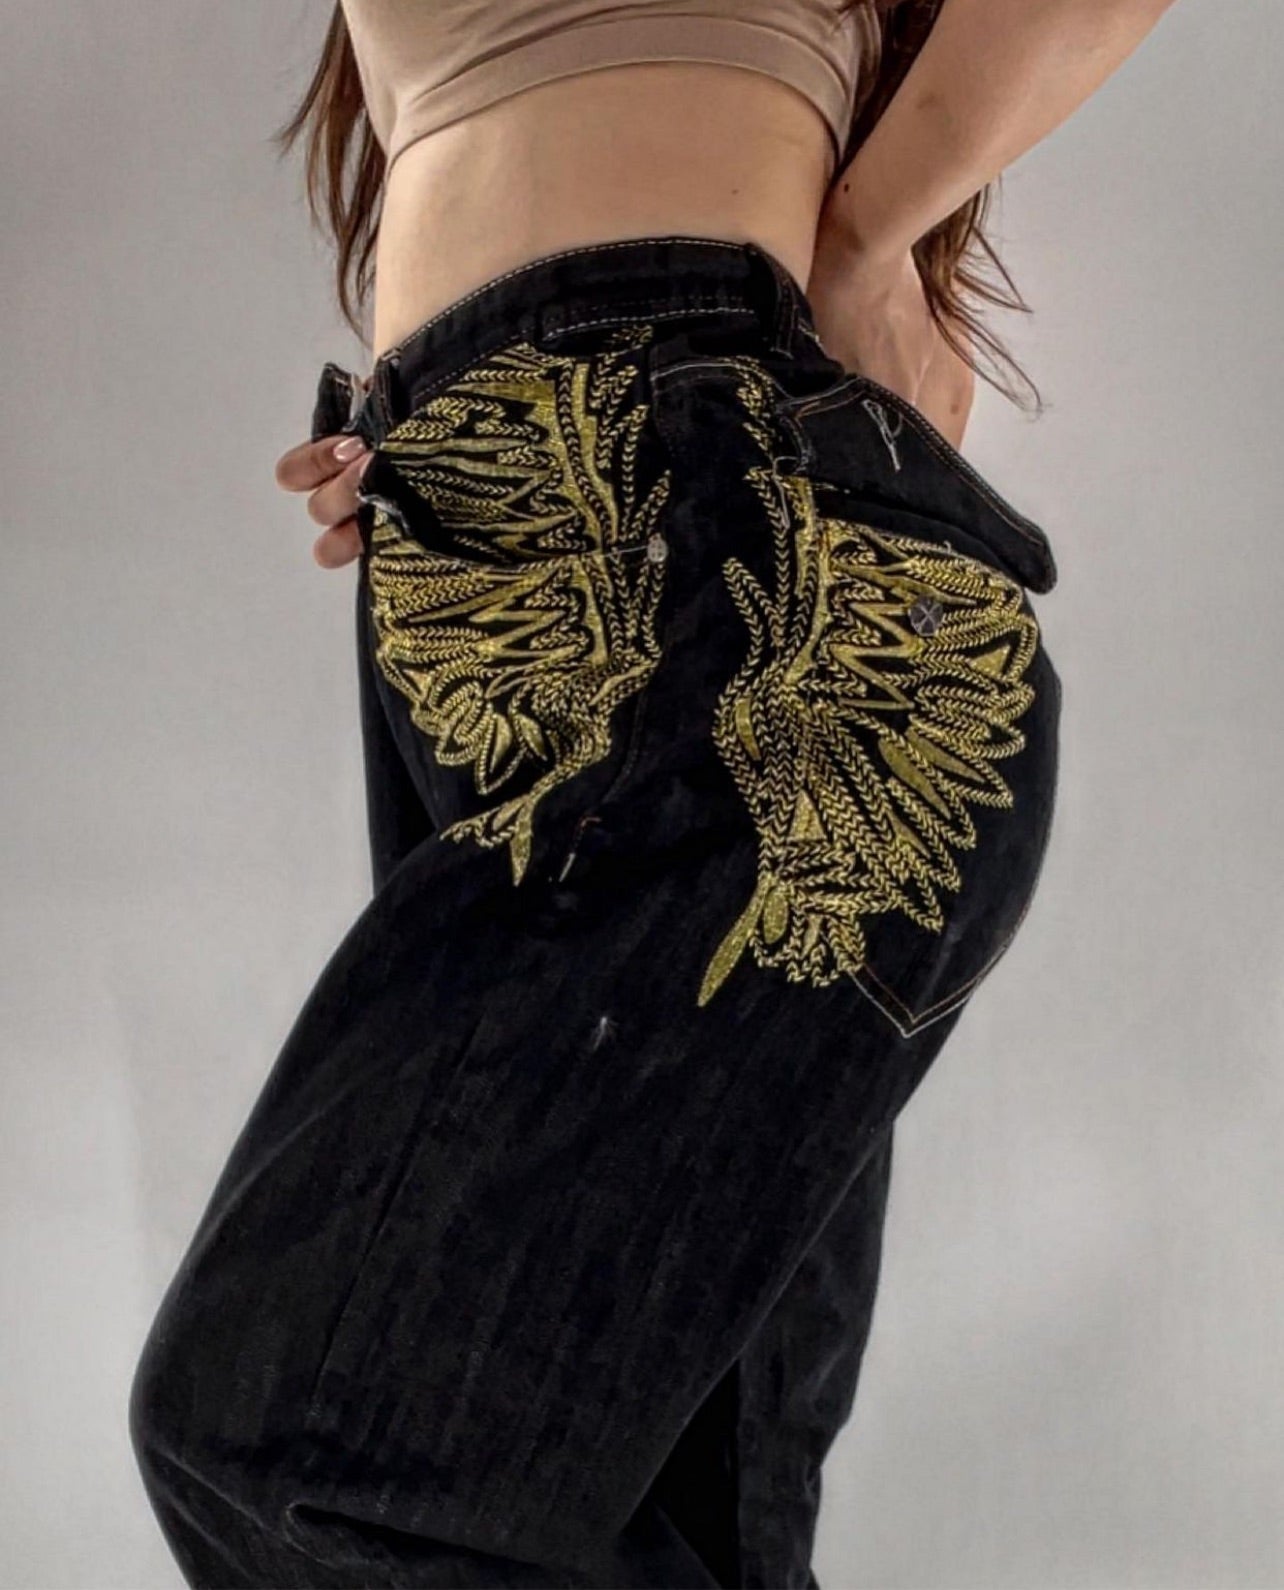 Vintage Raw Blue Embroidered Jeans